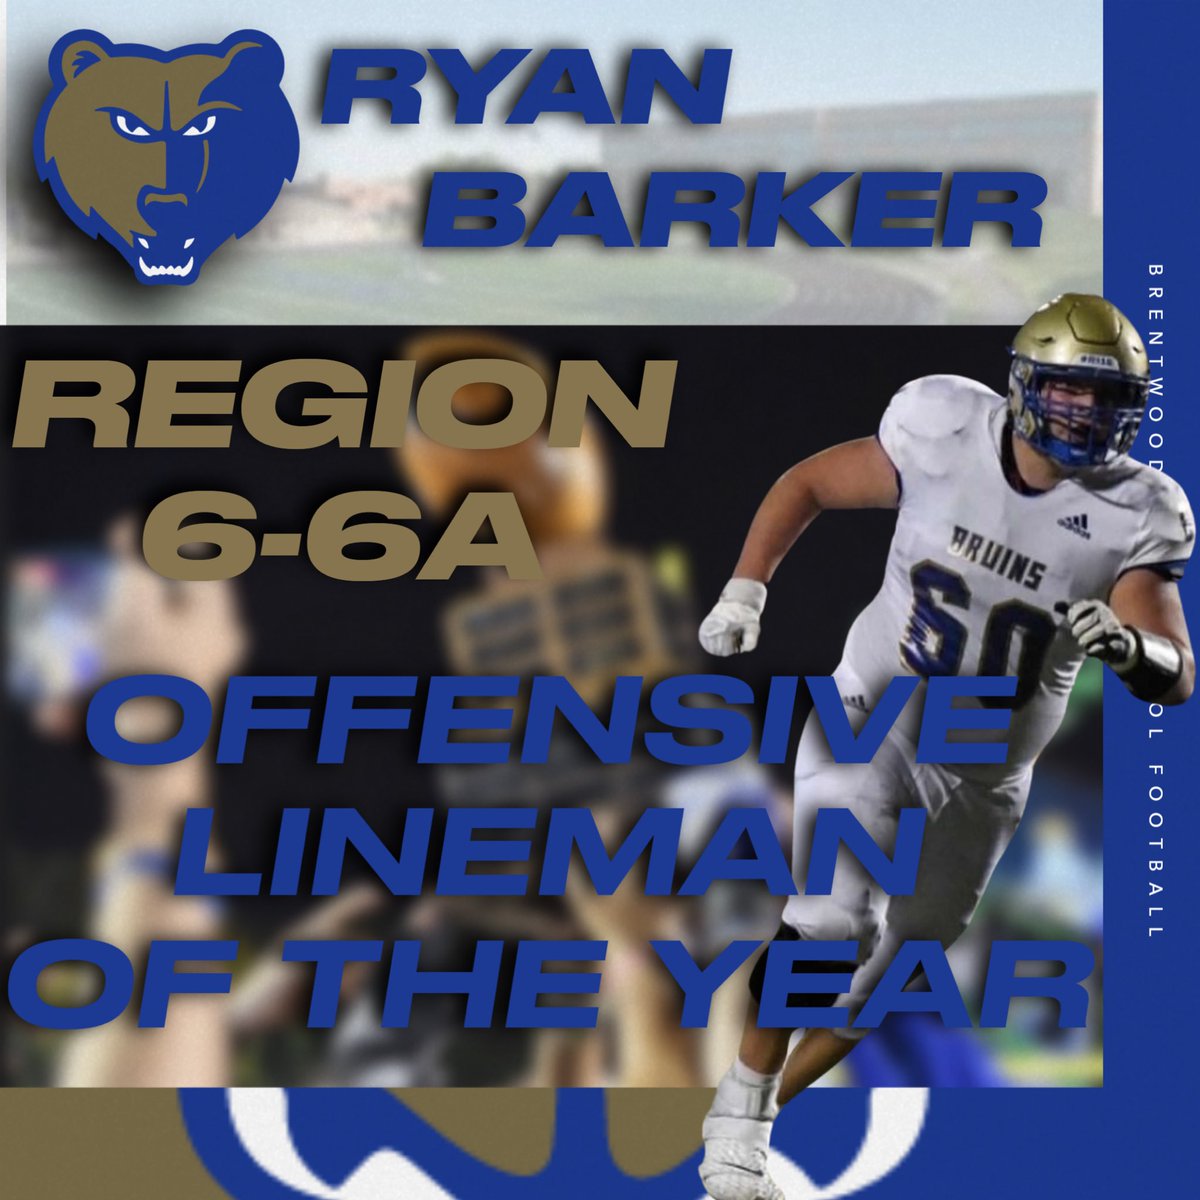 Congrats to @RyanBar35578096 for being selected the Region 6-6A Offensive Lineman of the Year! @wcsBHScf